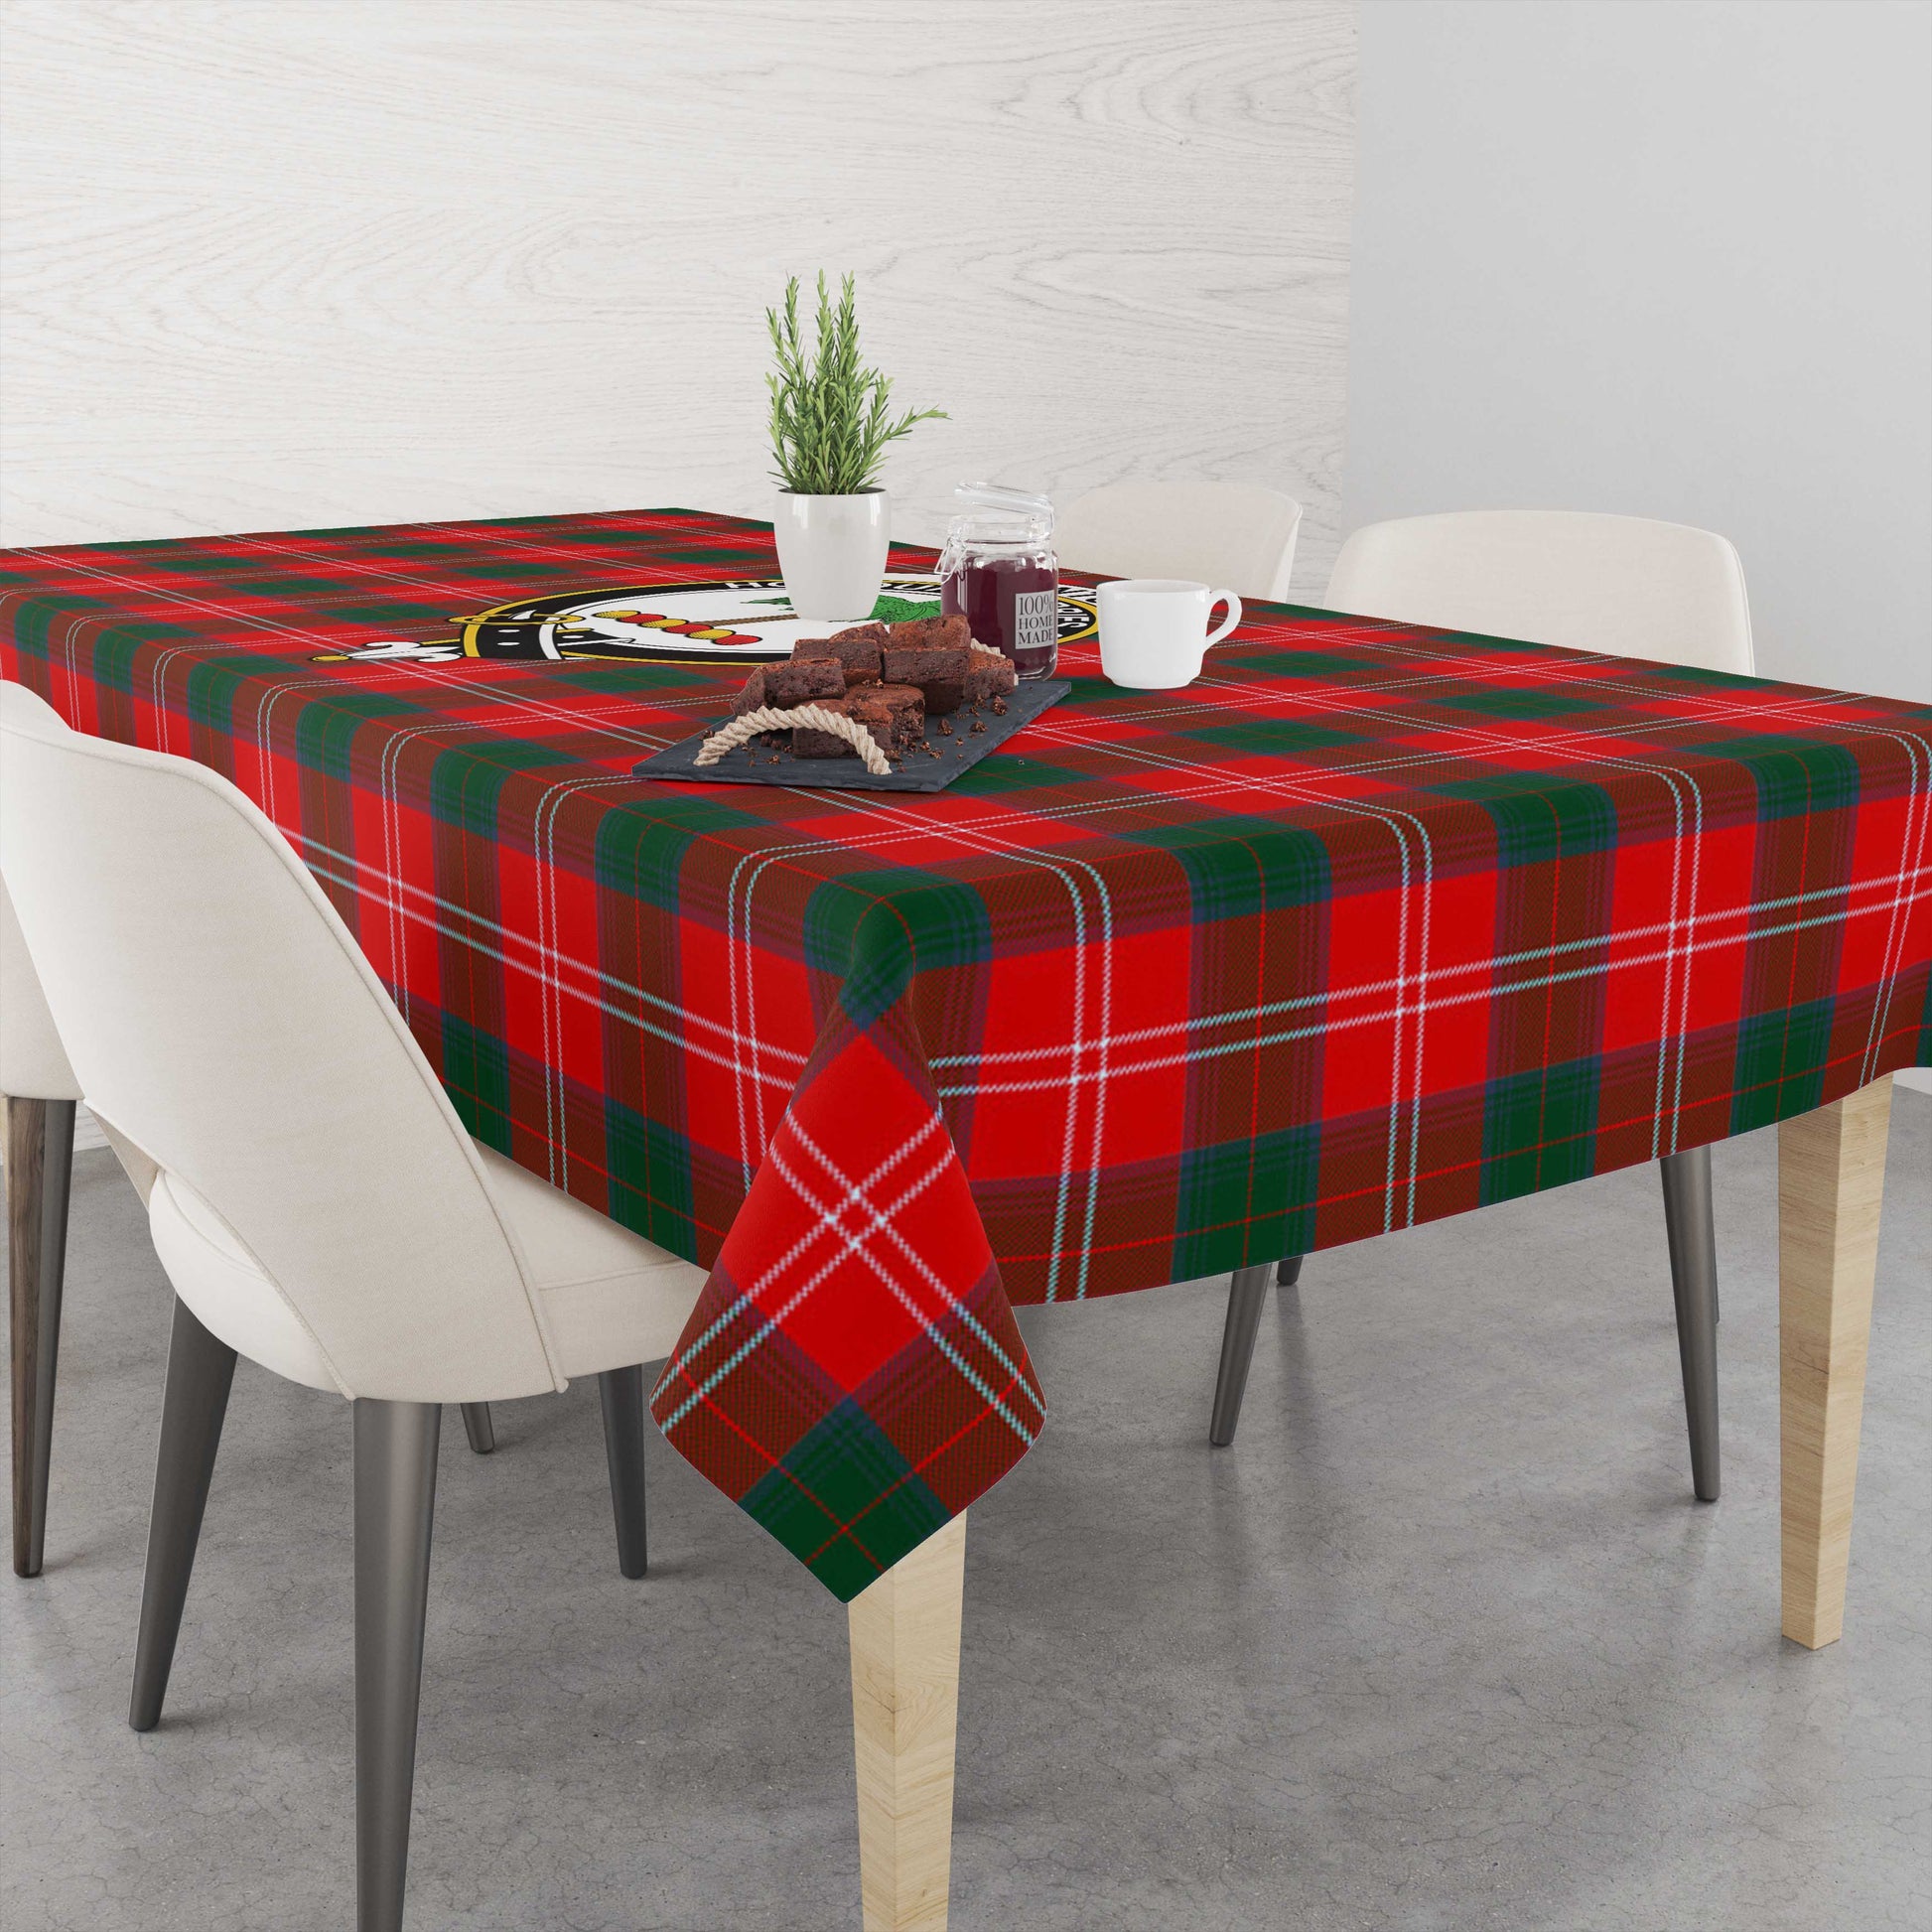 fenton-tatan-tablecloth-with-family-crest